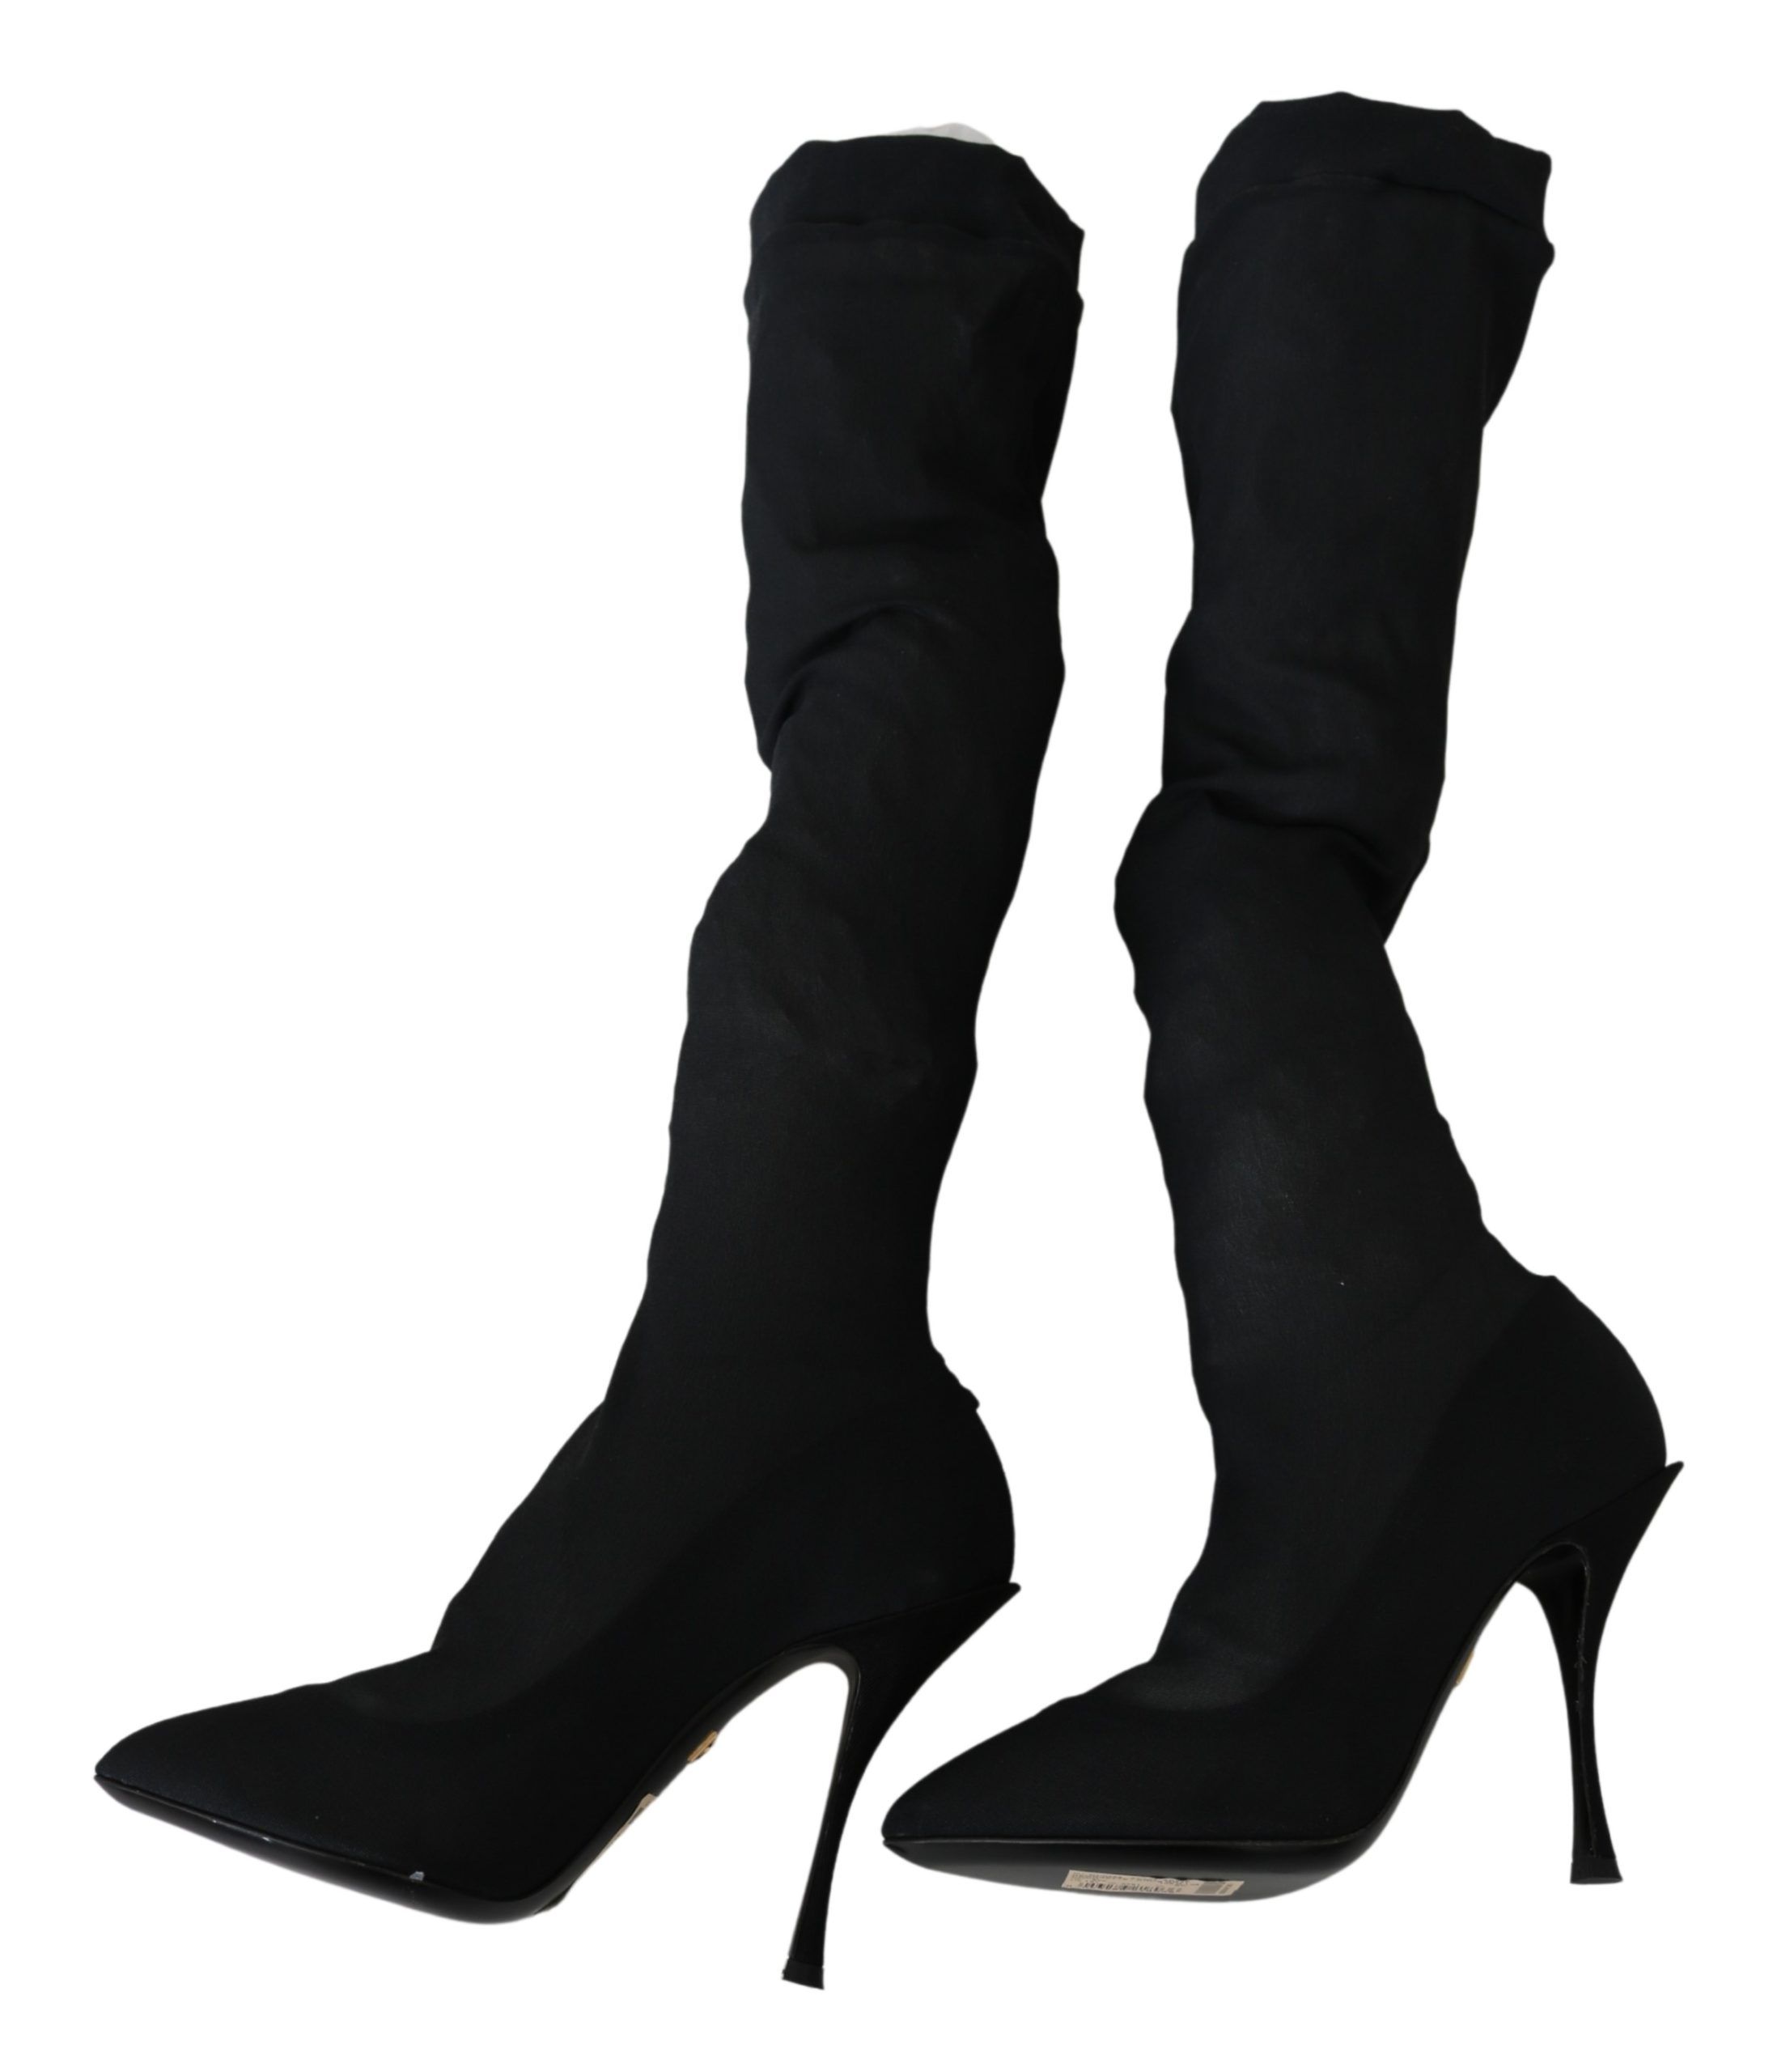 Dolce & Gabbana Black Tulle Stretch Knee Socks Boots Shoes